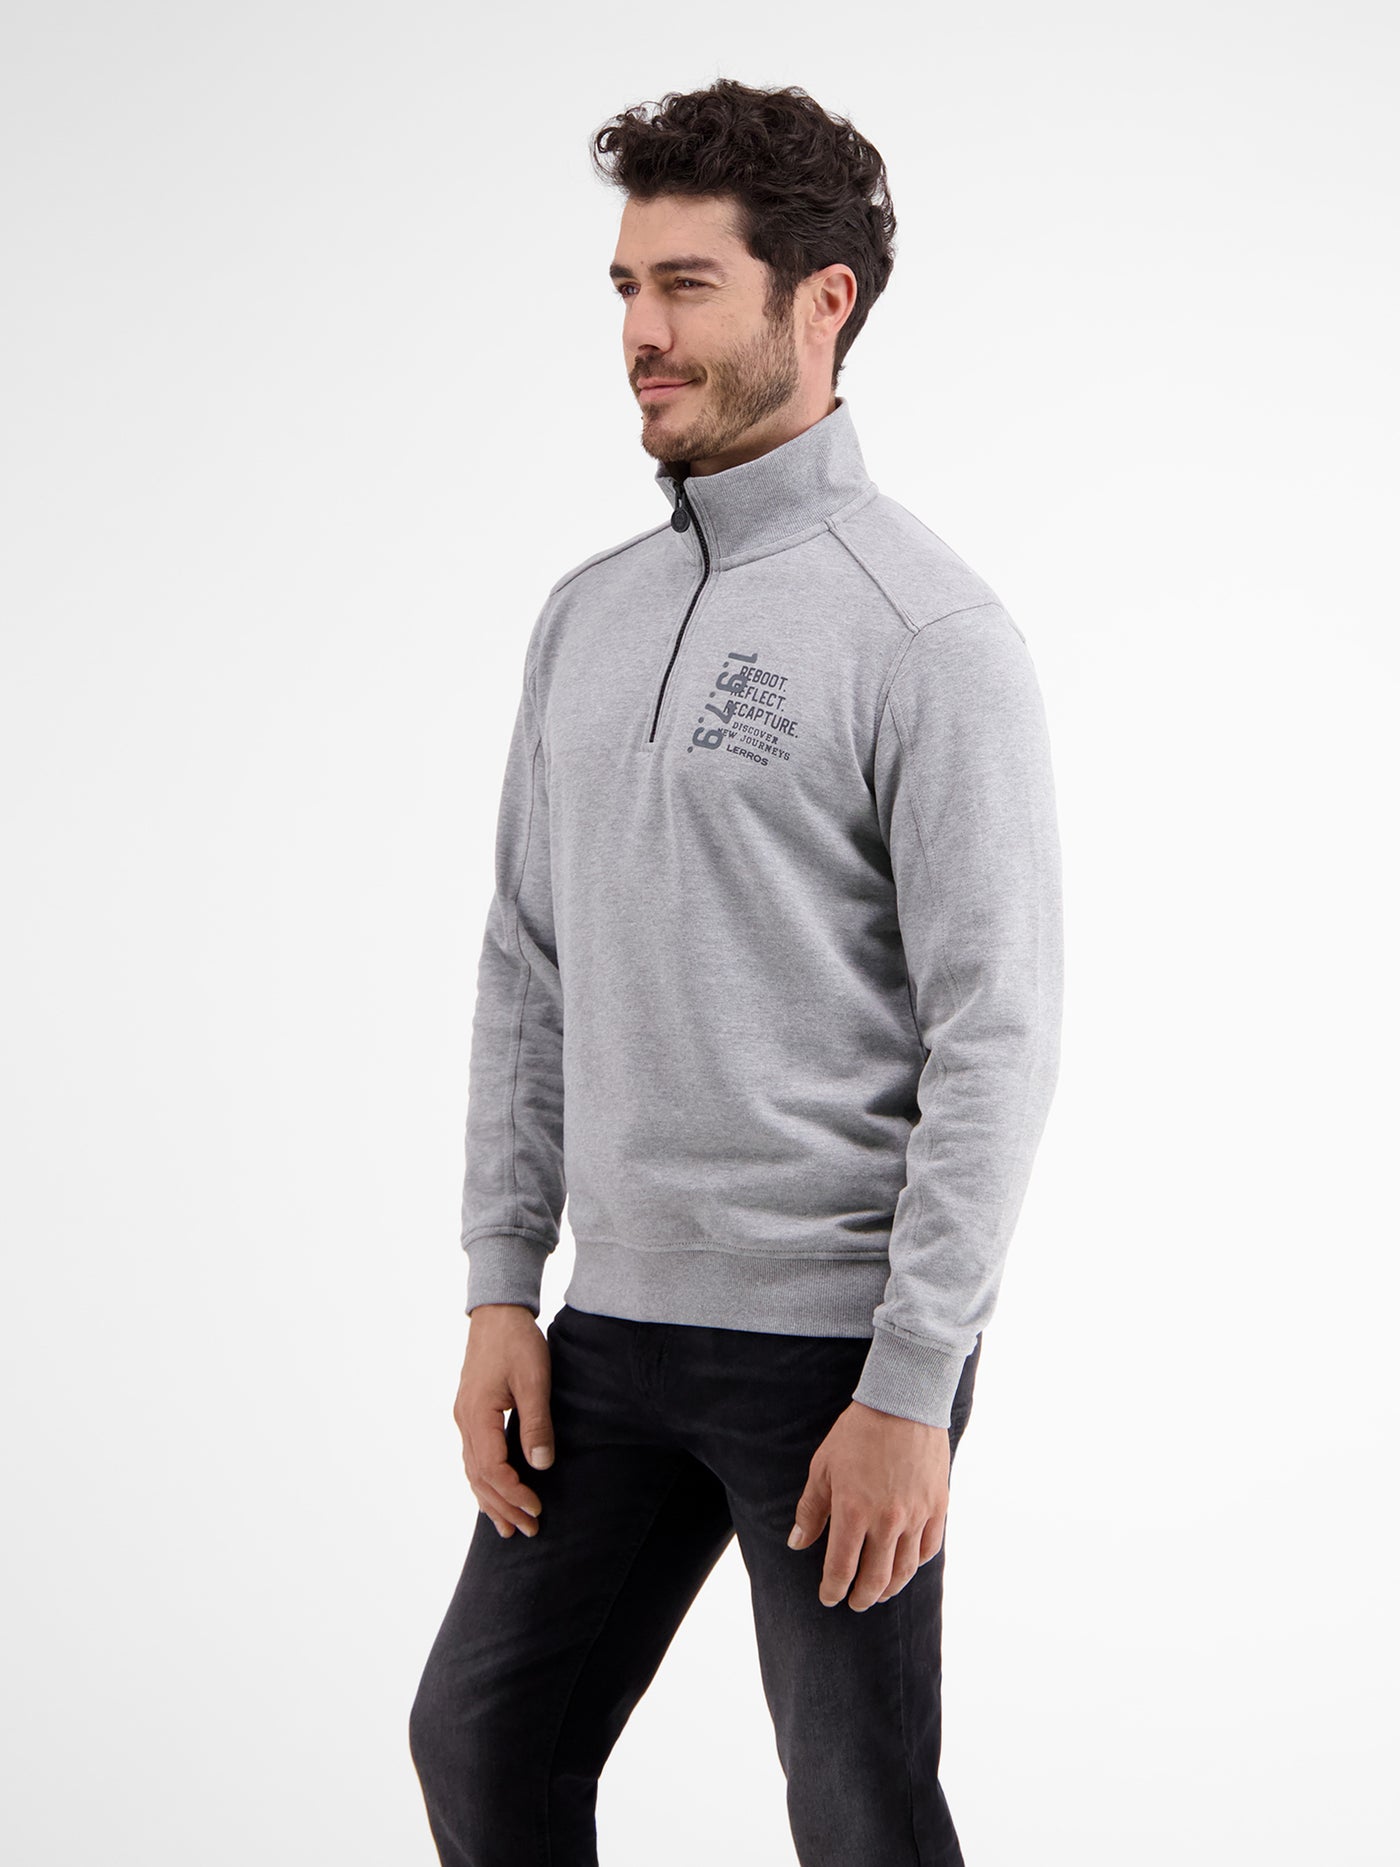 Troyer style in the best sweat quality